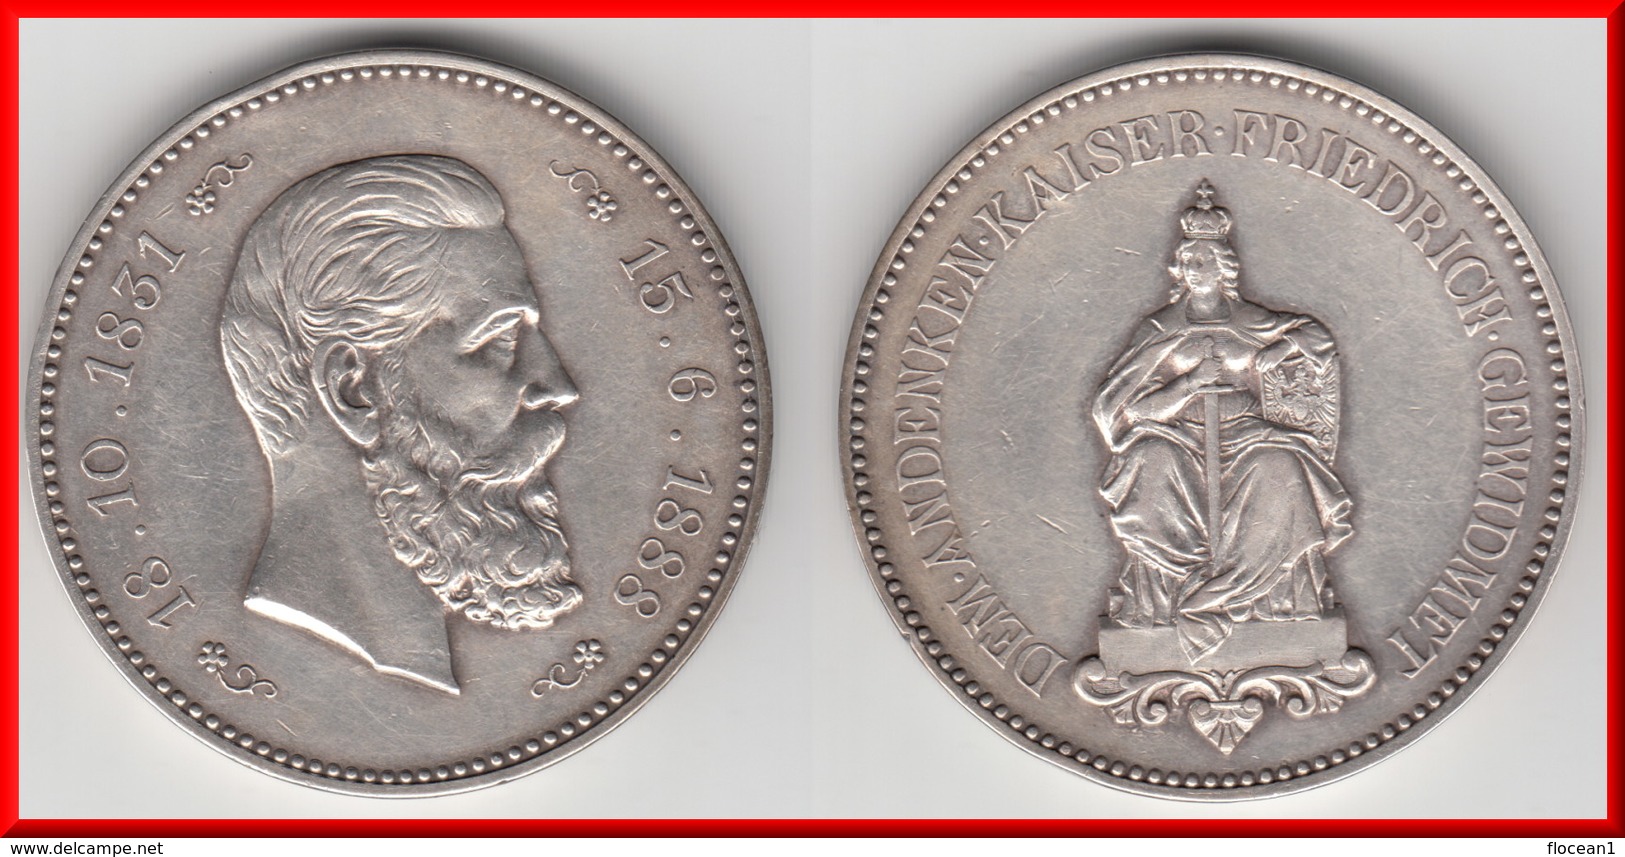 **** PREUSSEN - PRUSSIA - ALLEMAGNE - GERMANY - MEDAL KAISER FRIEDRICH 18.10.1831-13.6.1888 - SILVER **** ACHAT IMMEDIAT - Royal/Of Nobility